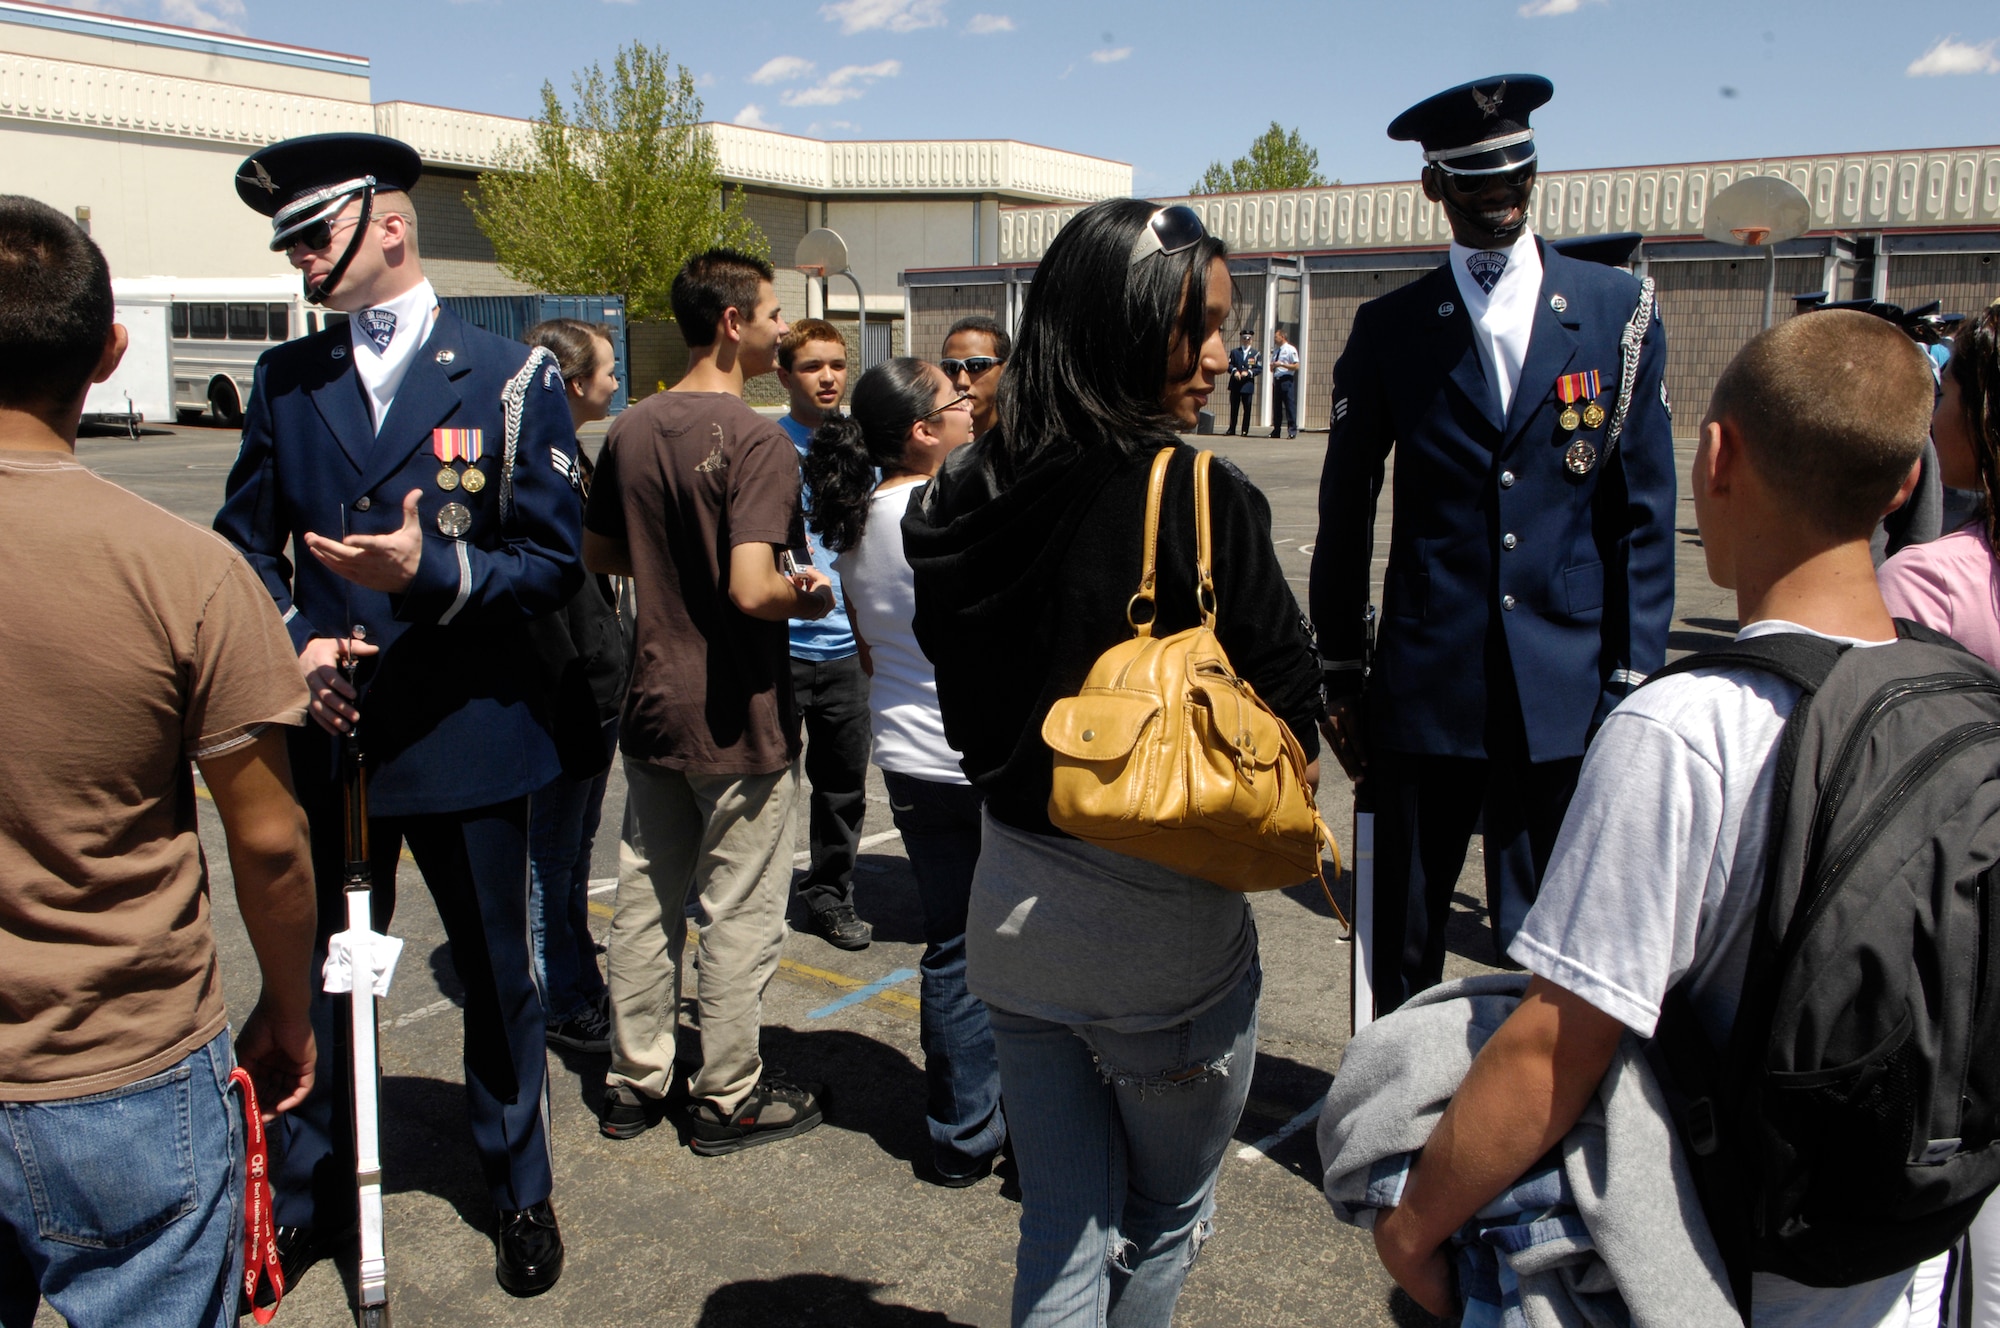 Senior Airmen Timothy Treadway and Jermaine James, Air Force Honor Guard Drill Team members, discuss Air Force opportunities and experiences with students from Lancaster HS, Calif. following their 16 Man performance during their California Tour.  The Drill Team is the traveling component of the Air Force Honor Guard and tours Air Force bases world wide showcasing the precision of today's Air Force to recruit, retain, and inspire Airmen for the Air Force mission.(U.S. Air Force photo by Senior Airman Daniel R. DeCook)(Released)